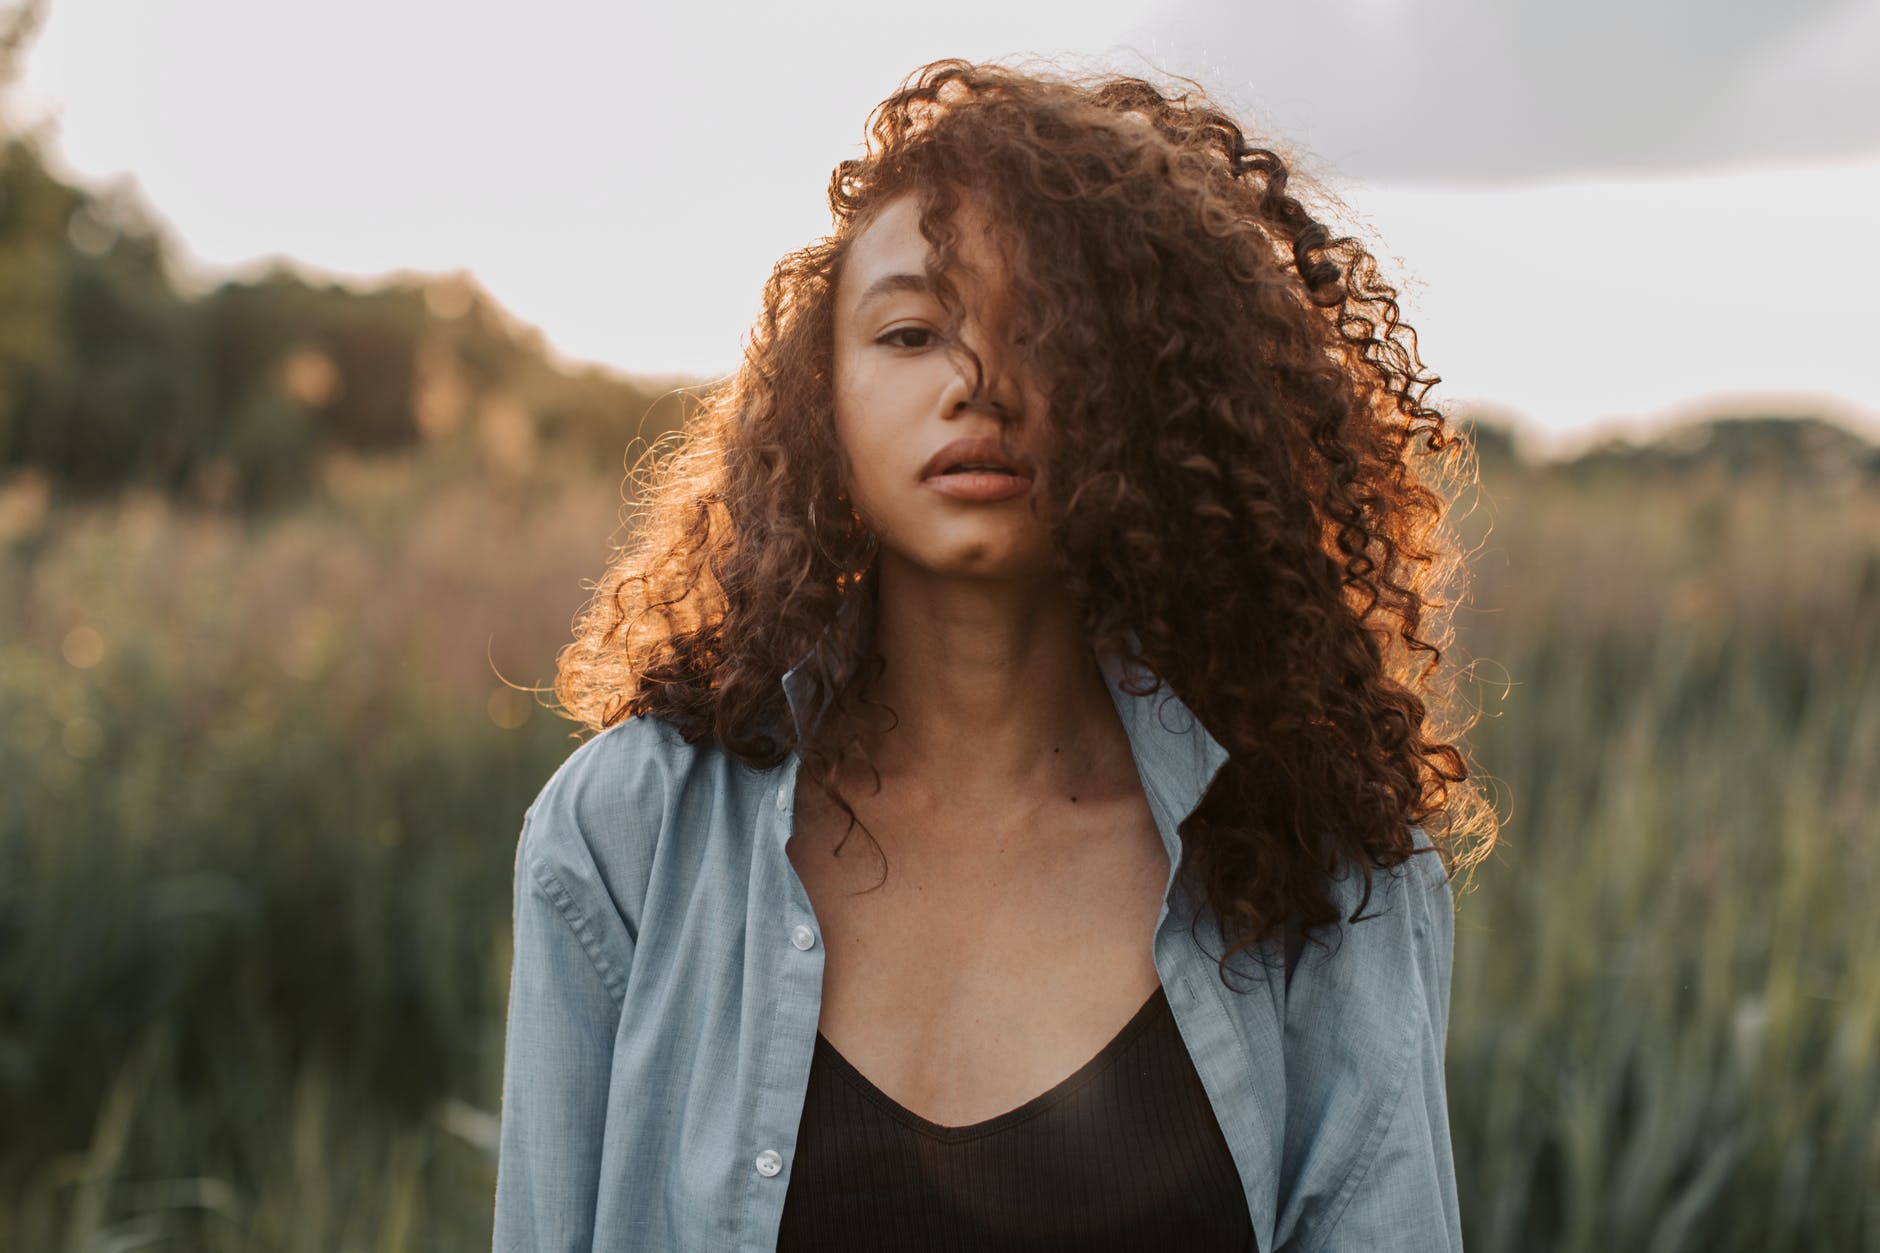 portrait photo of woman with natural curly hair